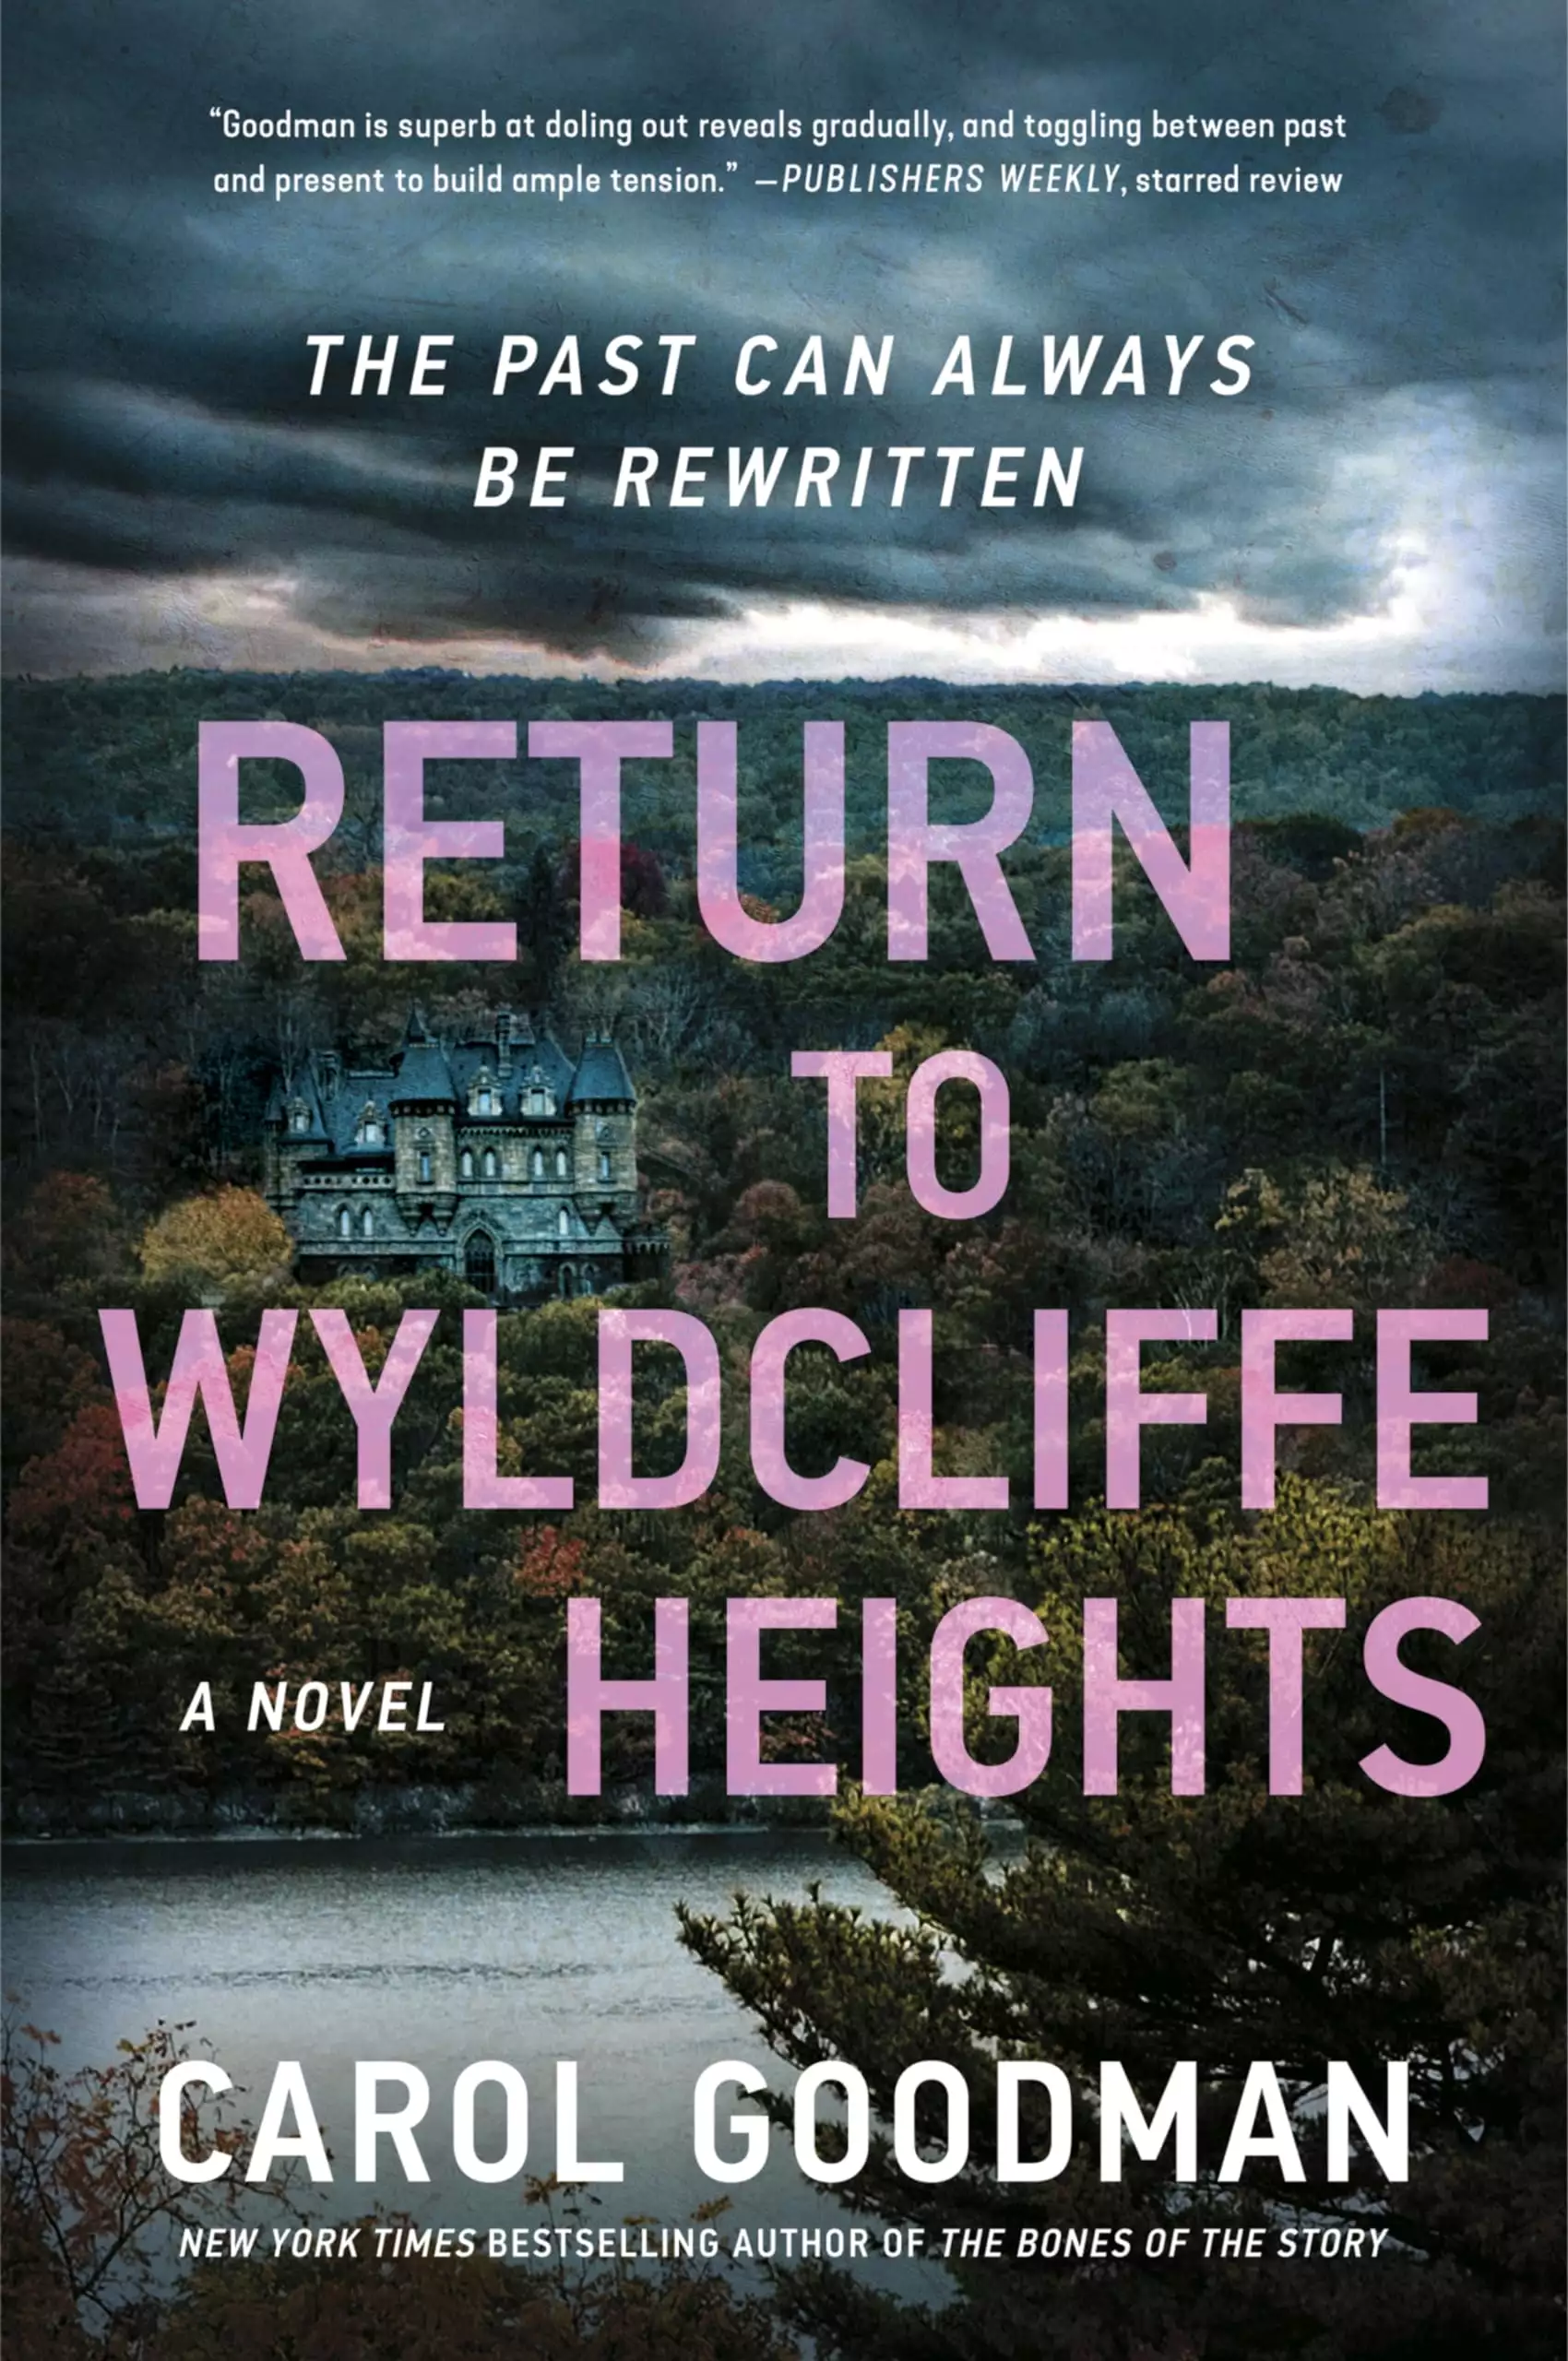 Return to Wyldcliffe Heights: A Novel